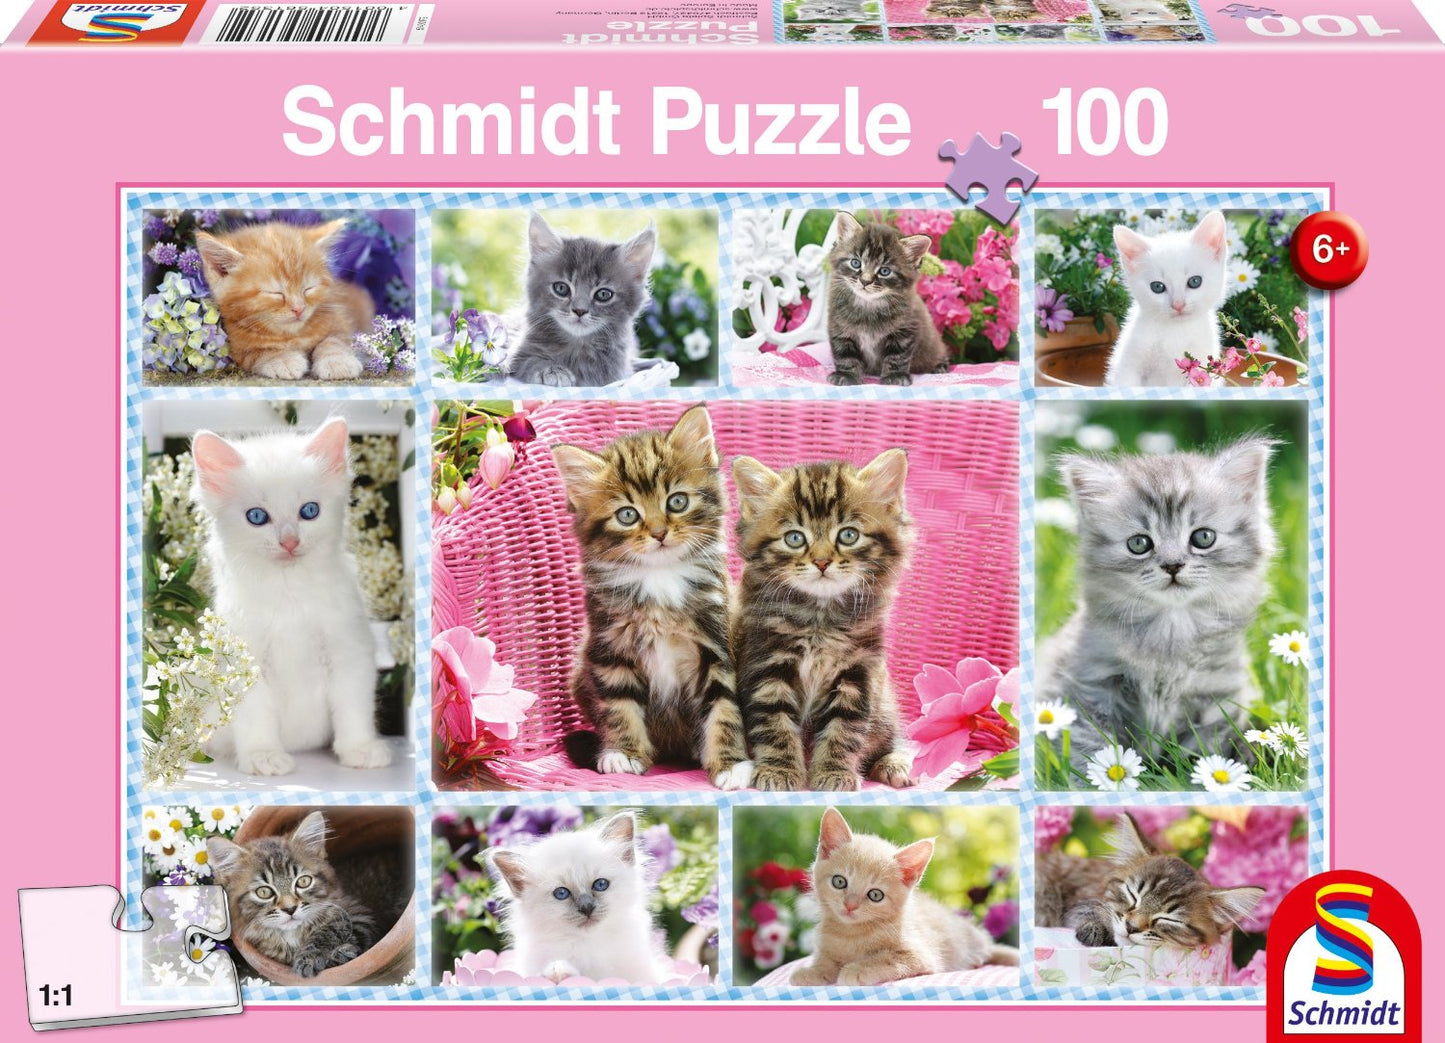 Kittens by Greg Cuddiford, 100 Piece Puzzle